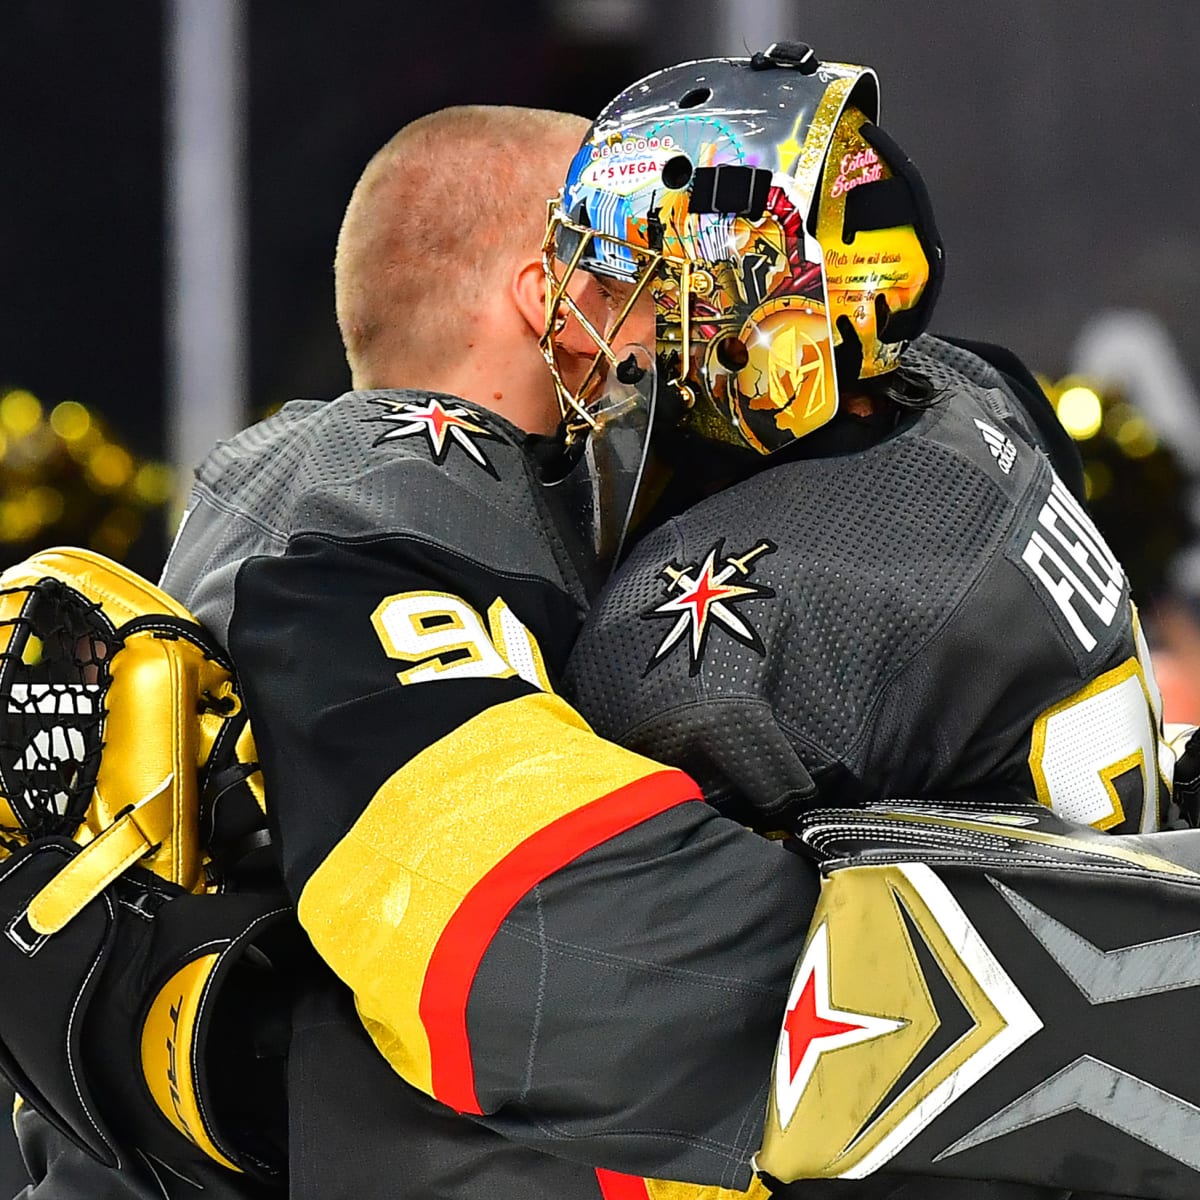 How Long Will Fleury Remain Happy Behind Lehner?